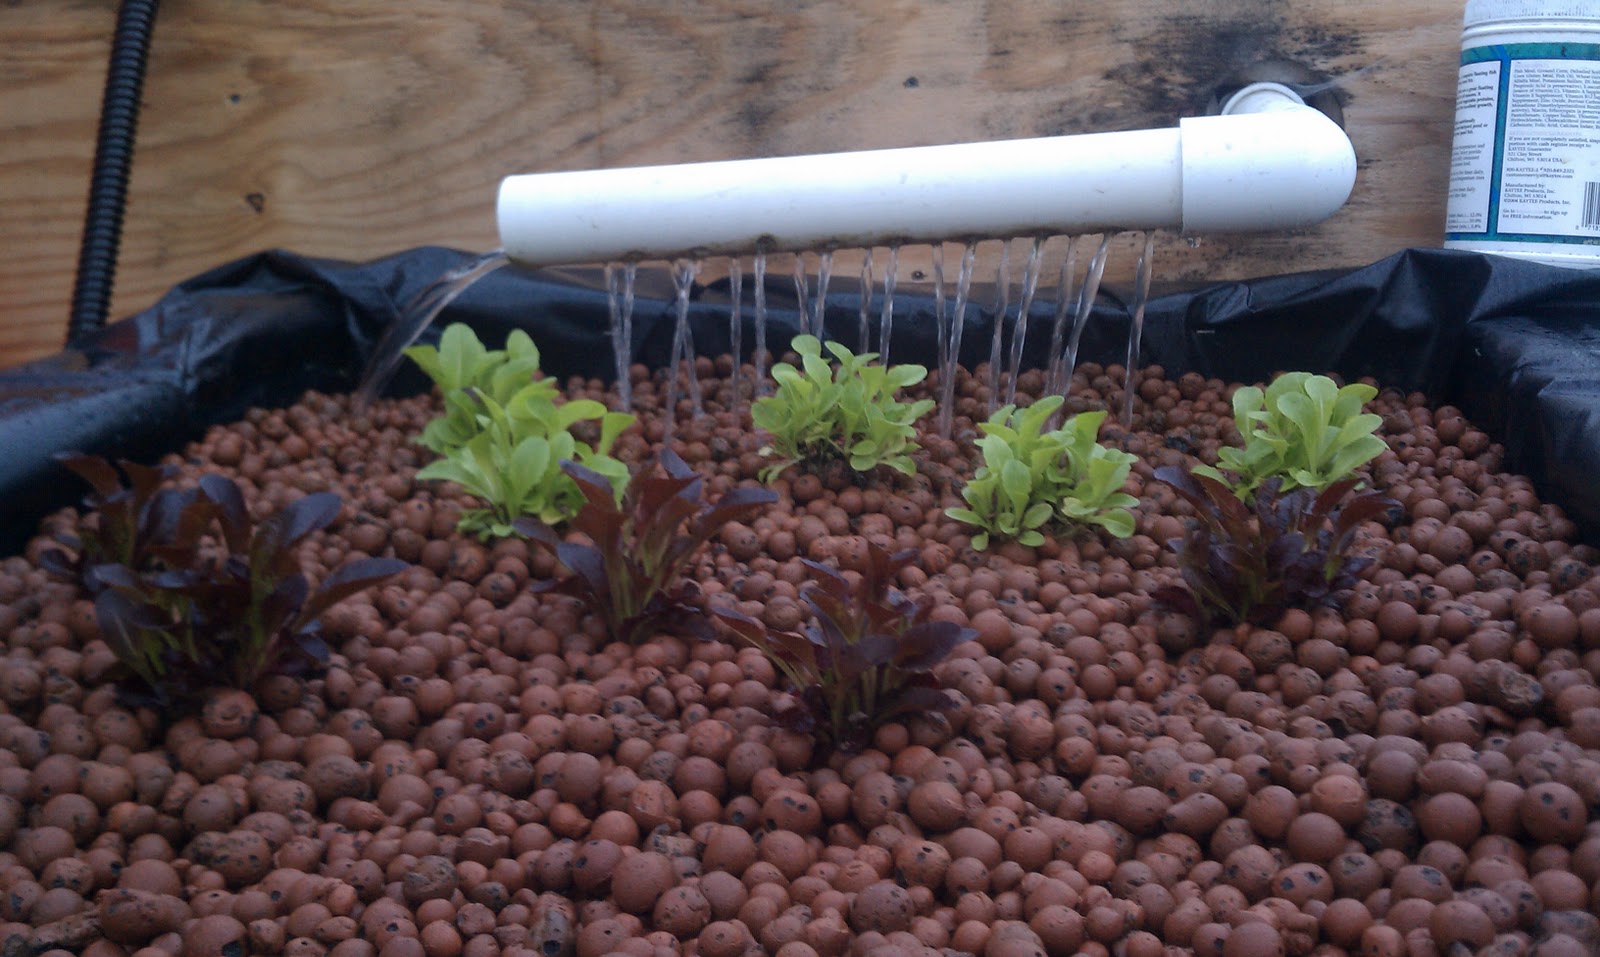 Friday's Aquaponics: 2011/01/30: Two week follow up on 